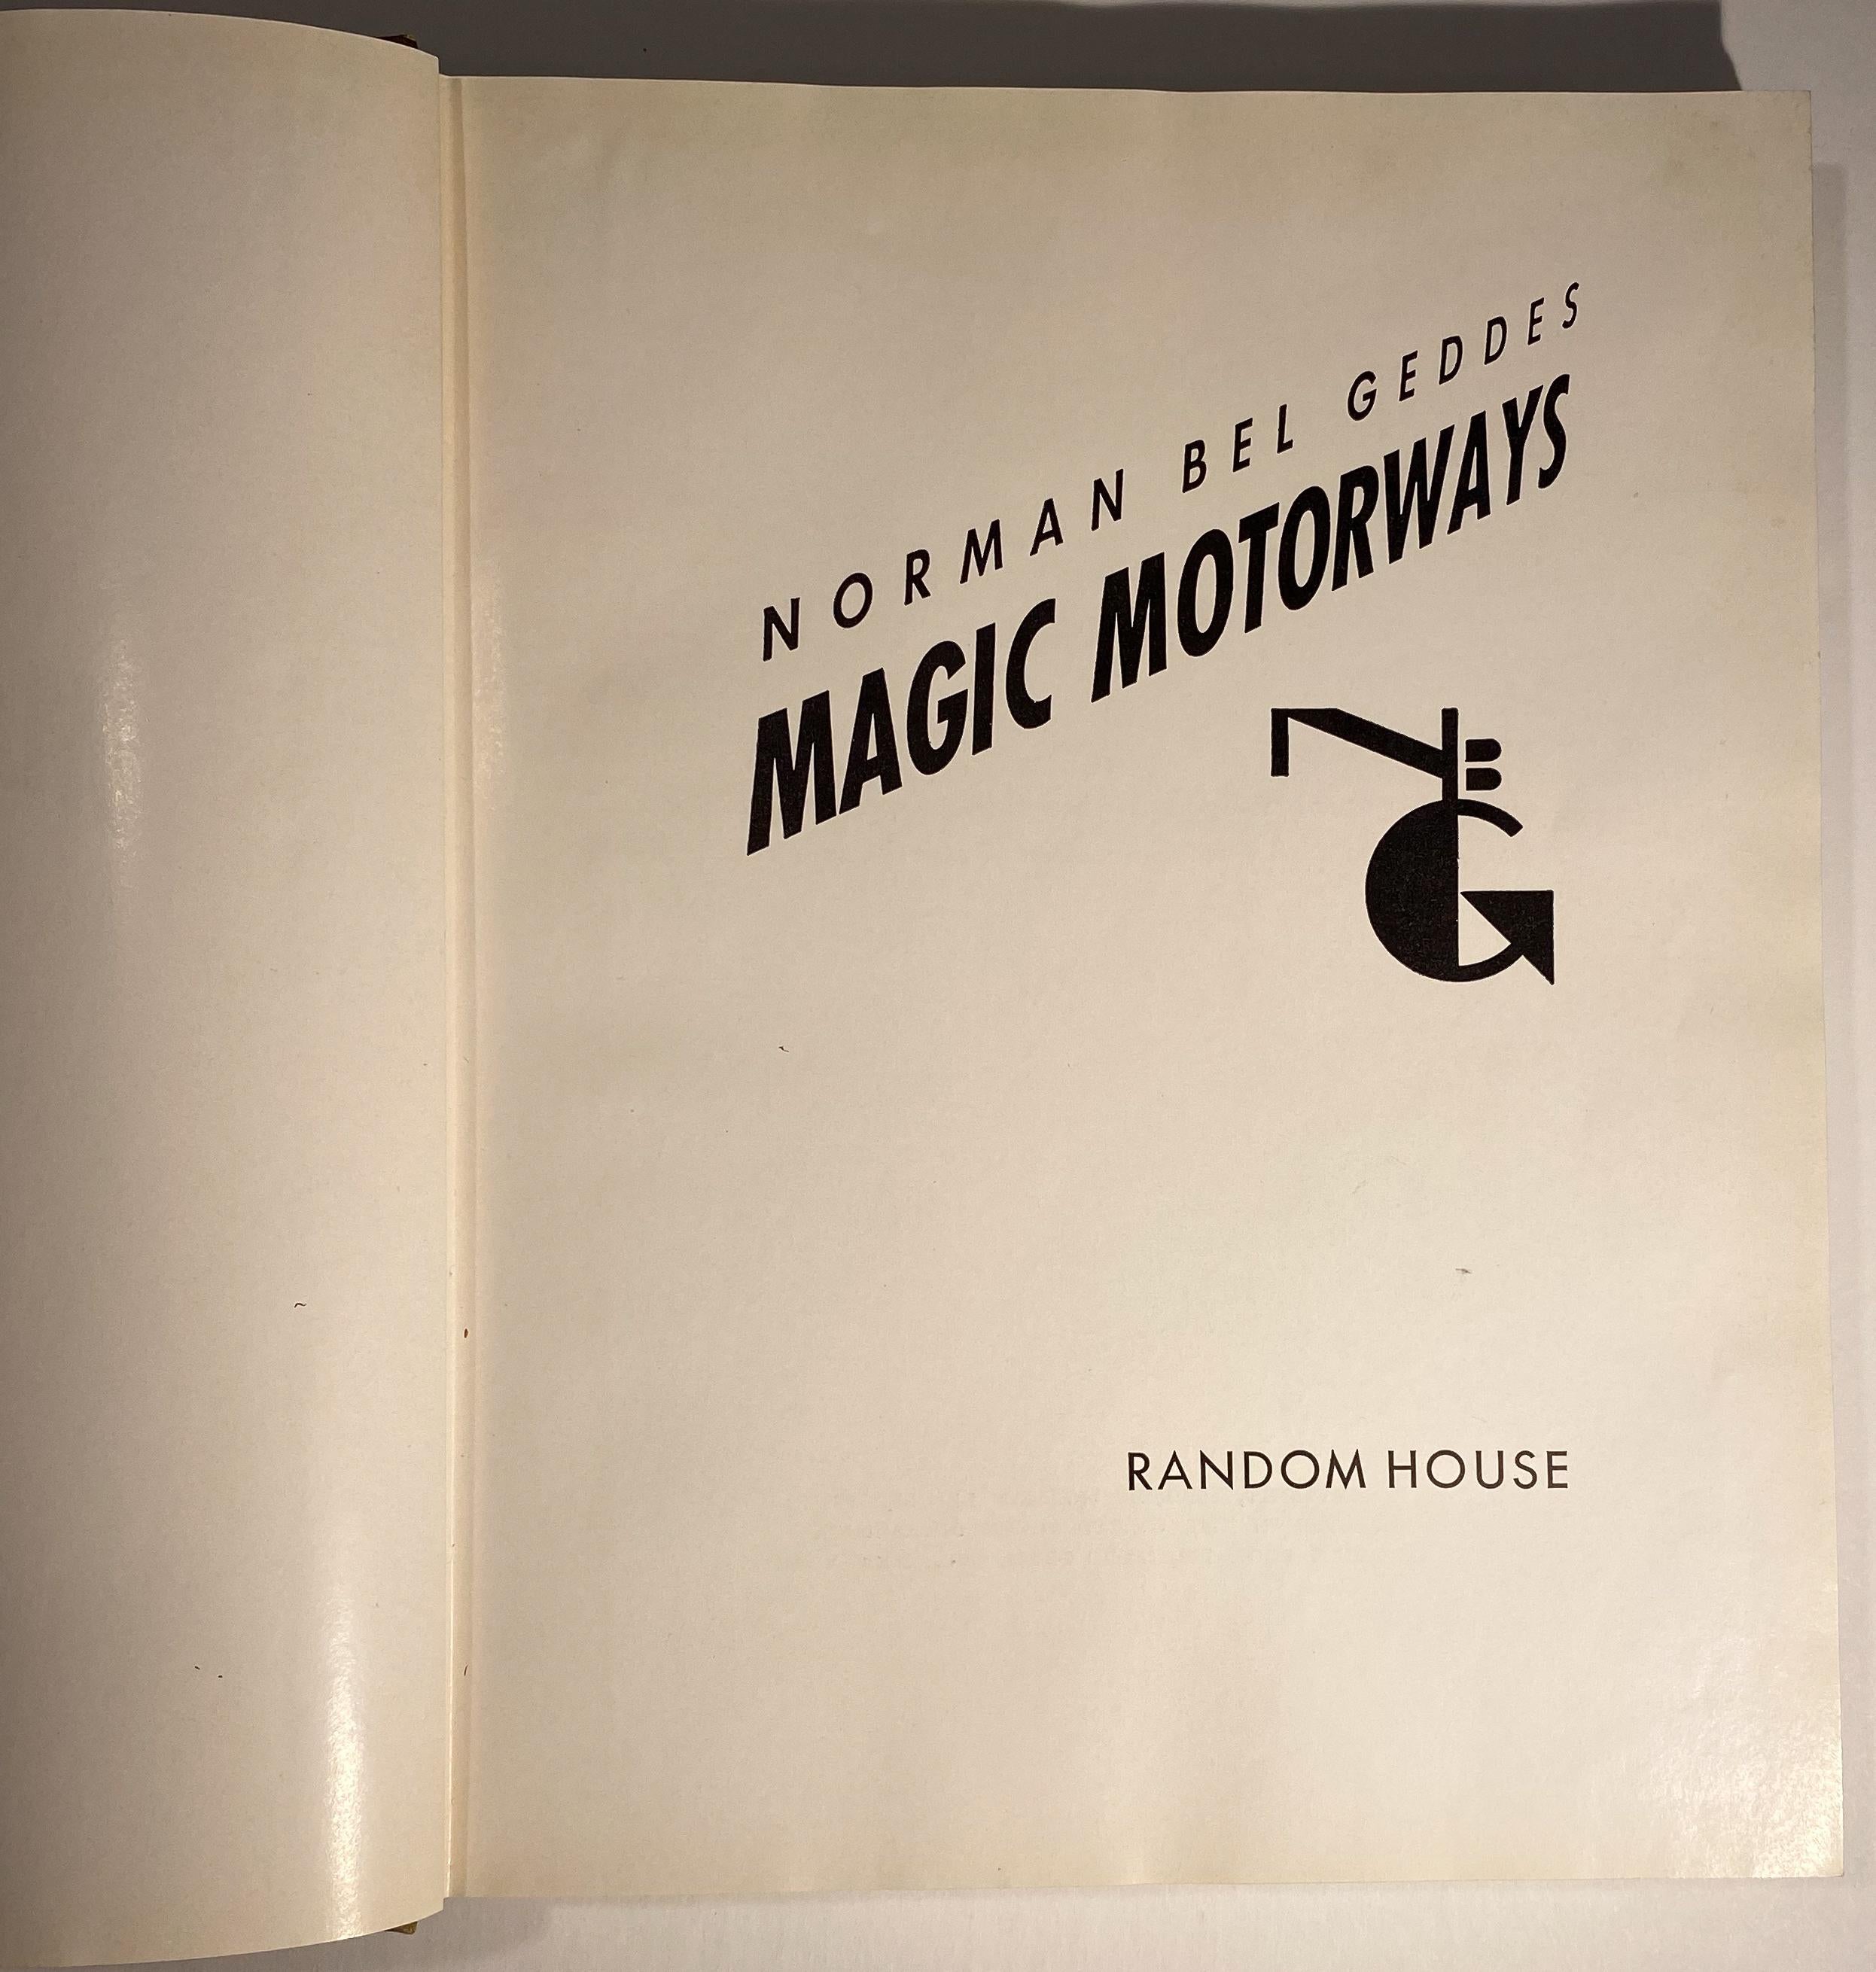 Paper Signed Copy of Magic Motorways by Norman Bel Geddes